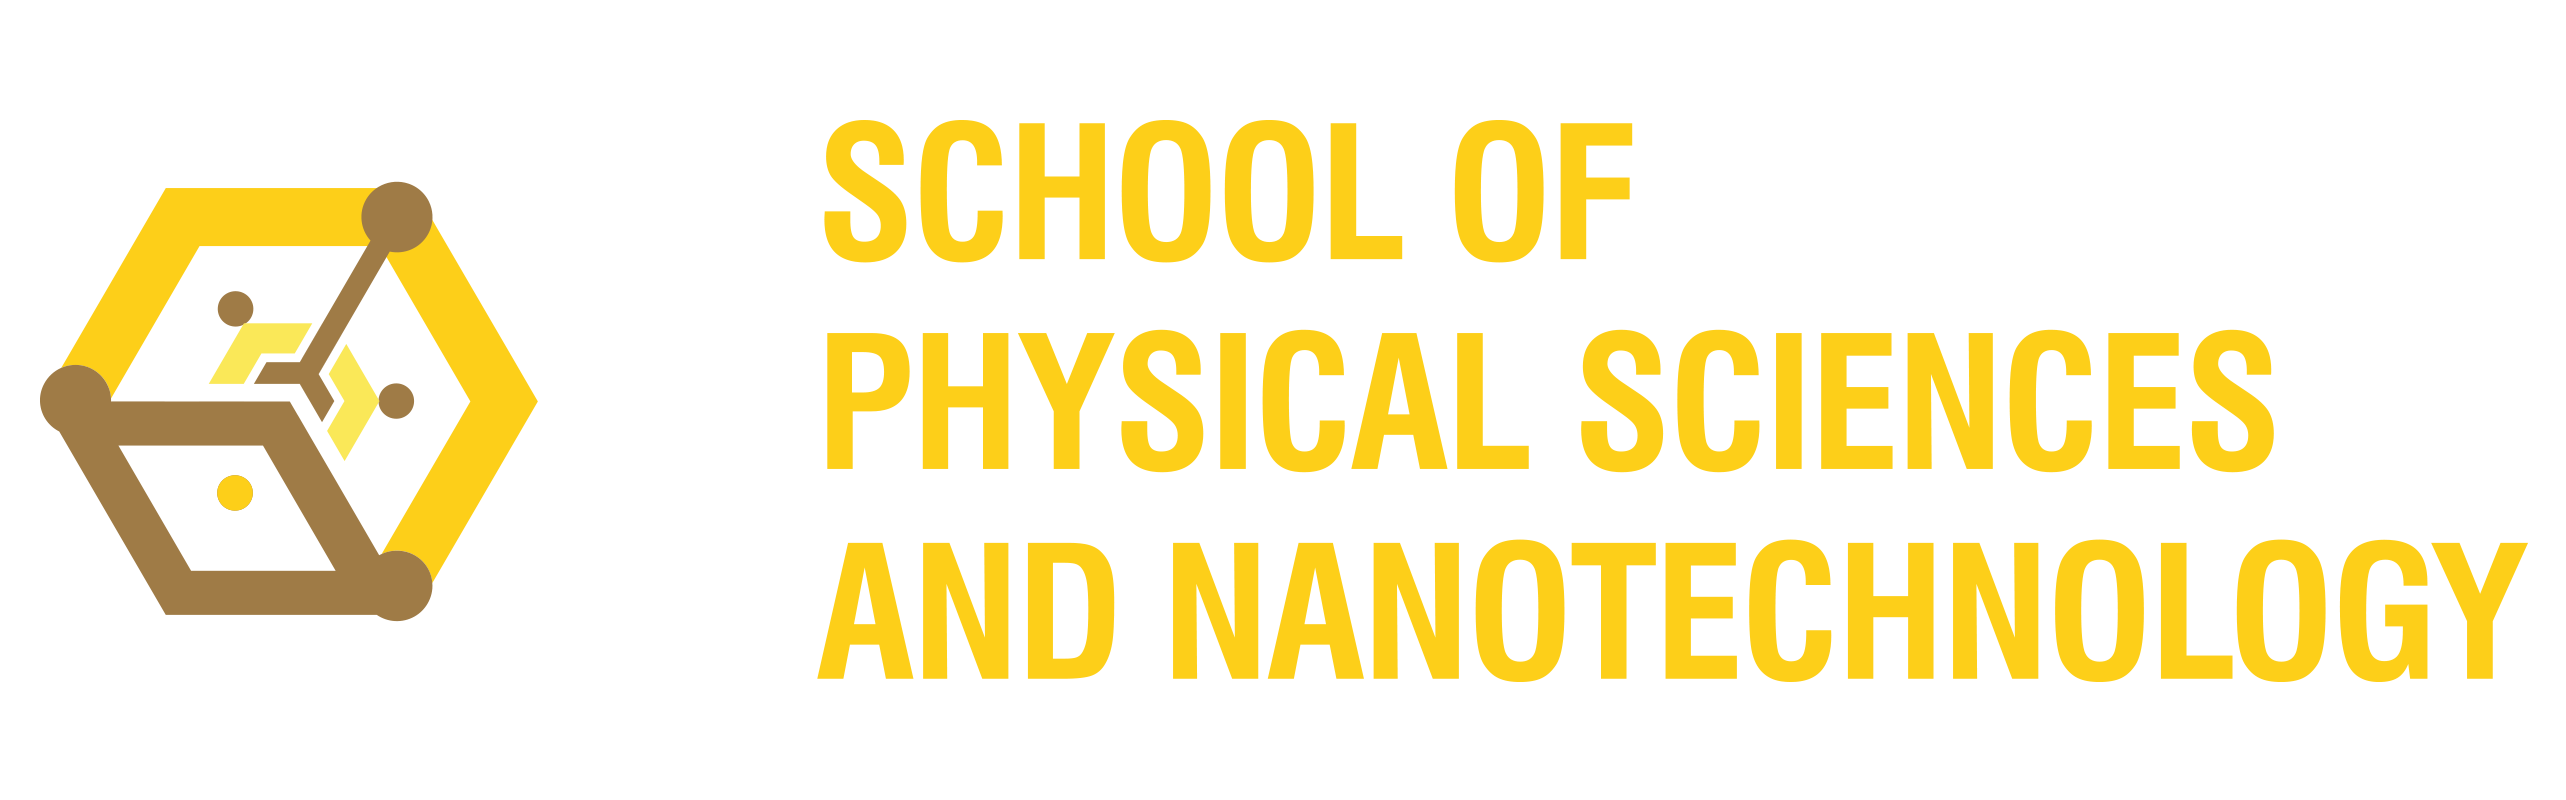 Physical Sciences and Nanotechnology